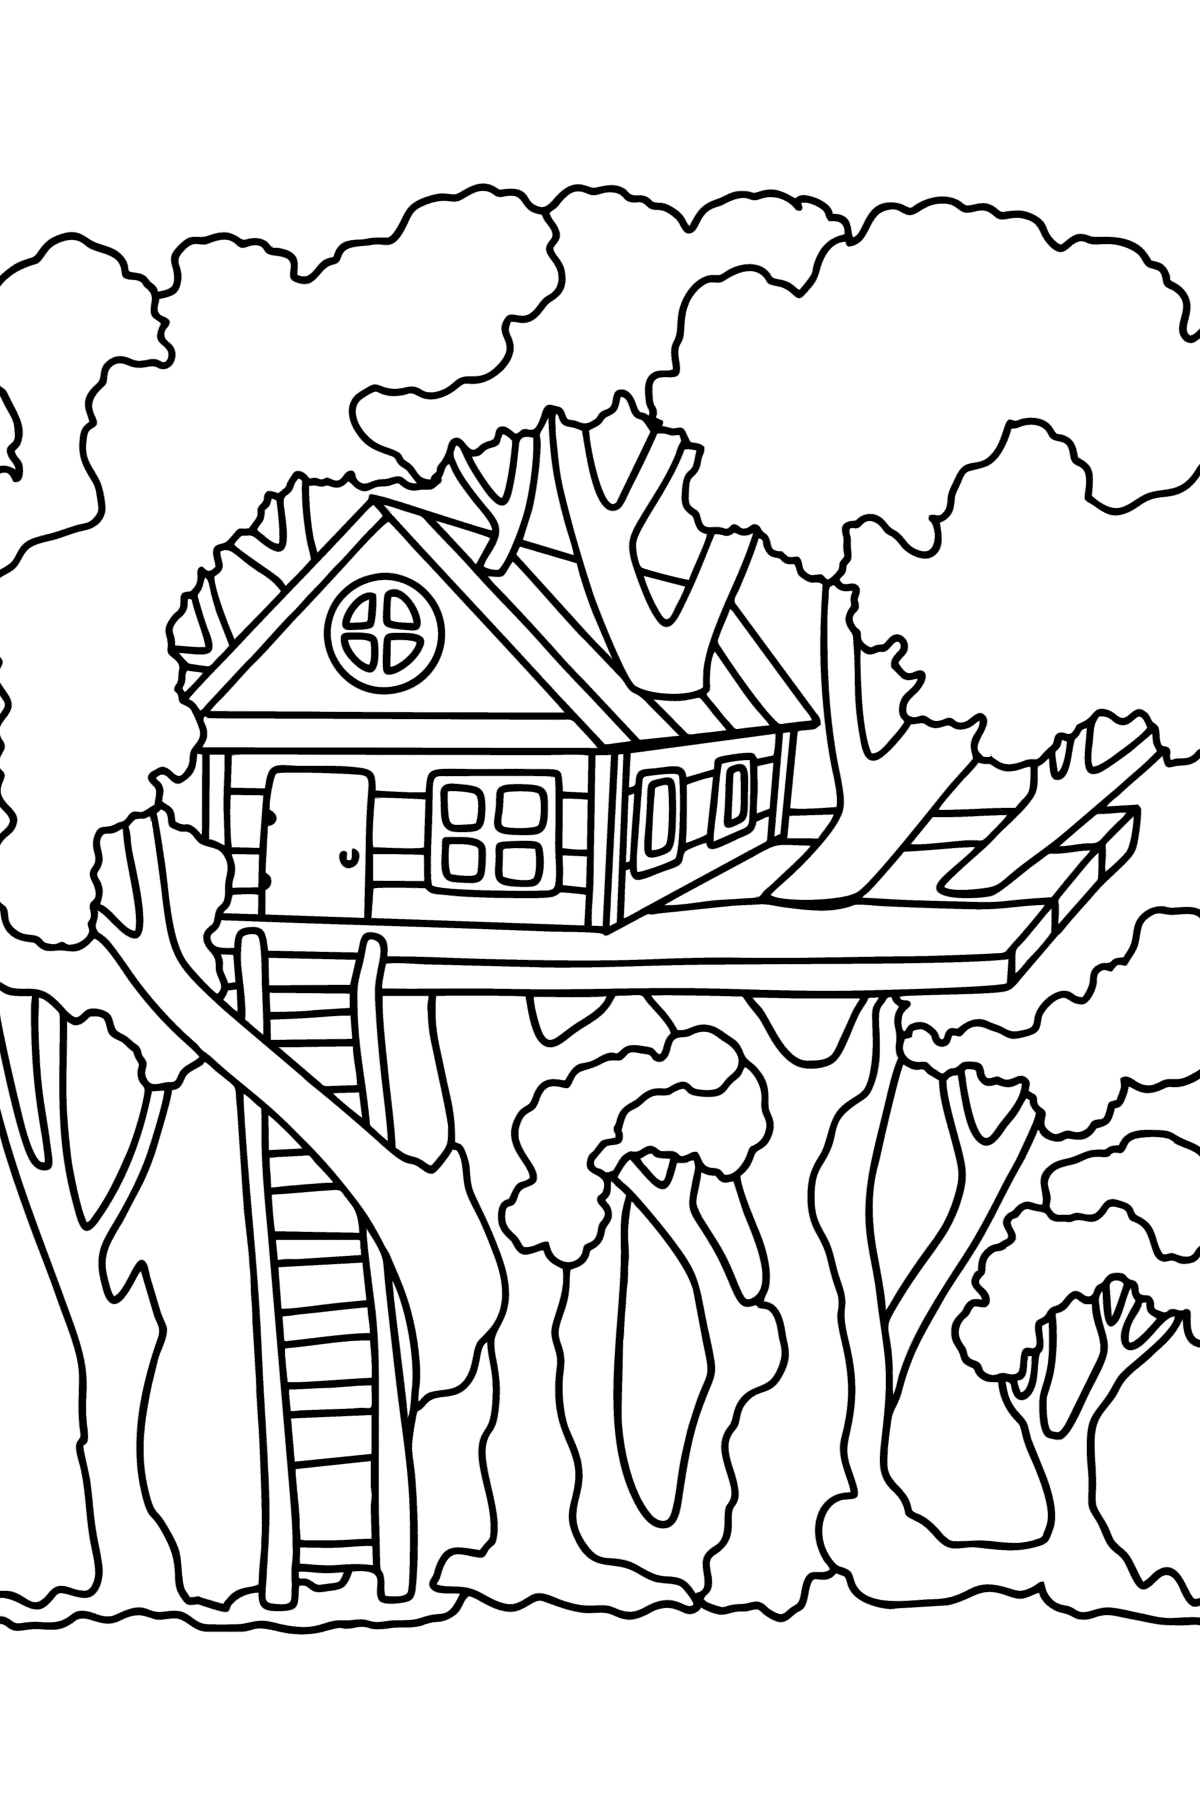 House on a tree coloring page - Coloring Pages for Kids